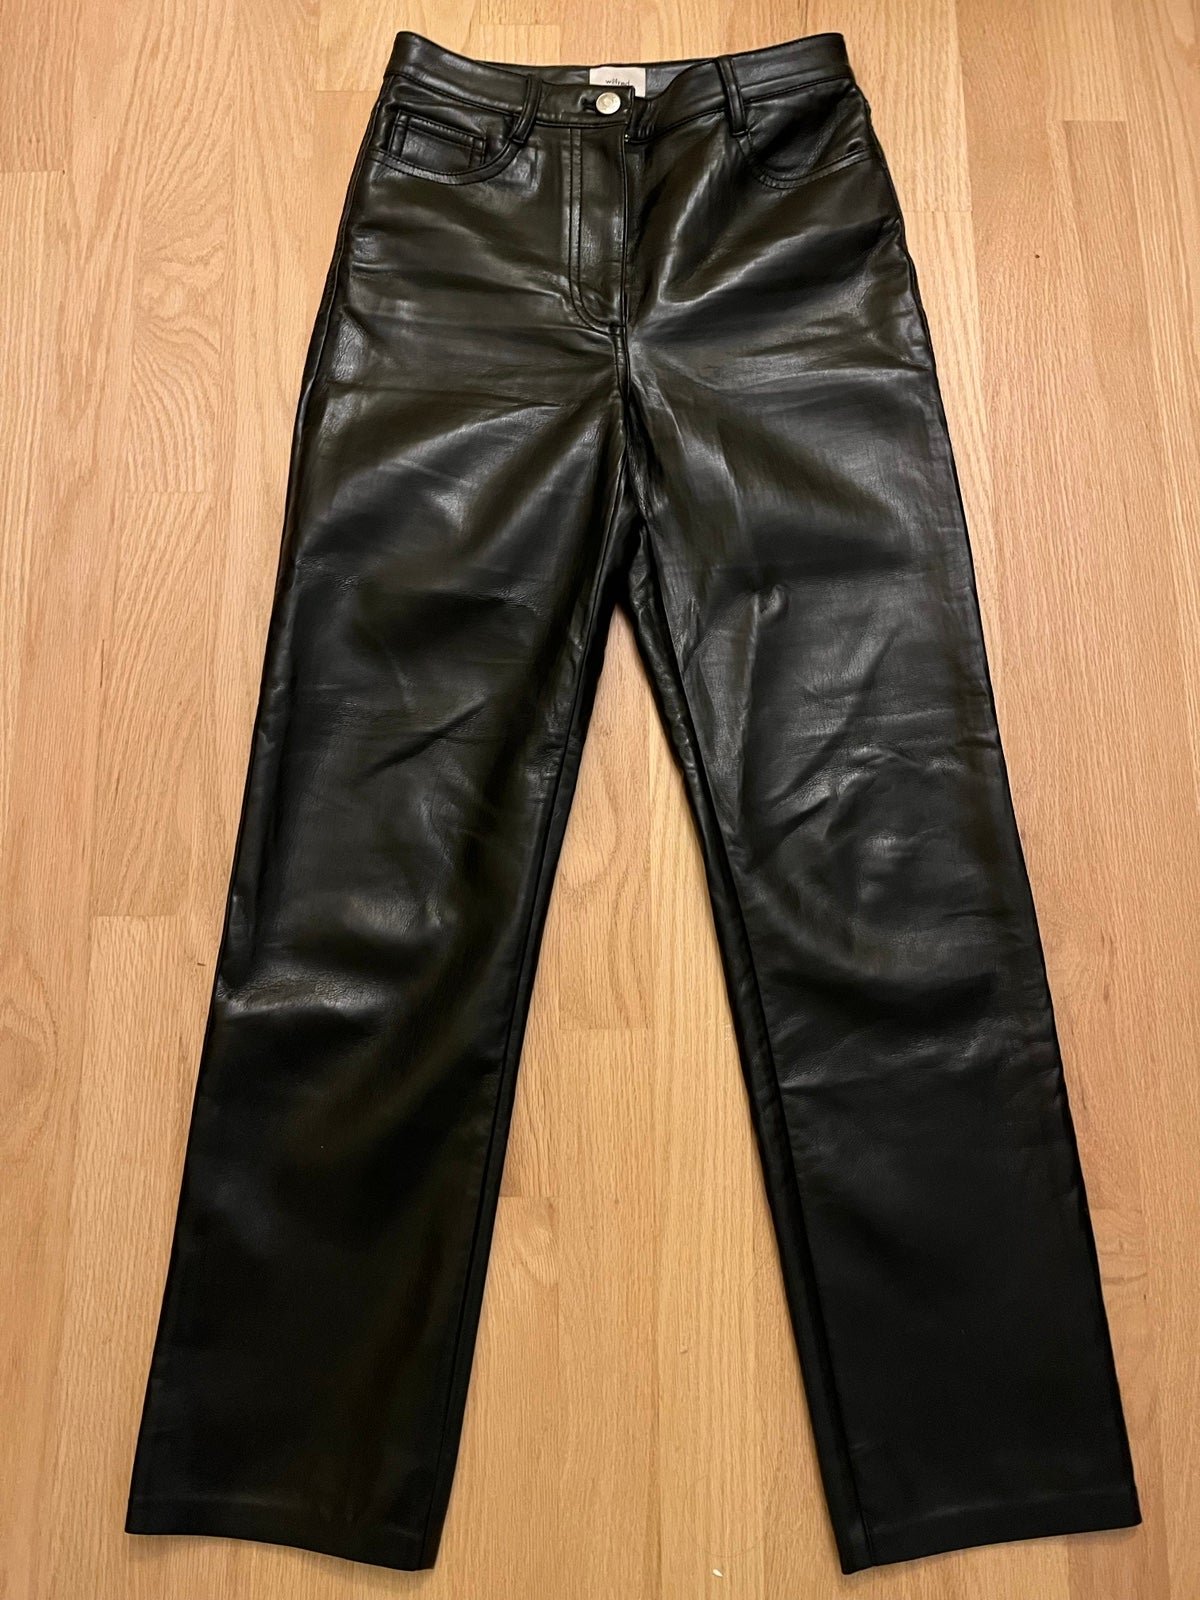 the Lowest price Aritzia High Waisted Leather Pants G30Zou4Wy Online Exclusive